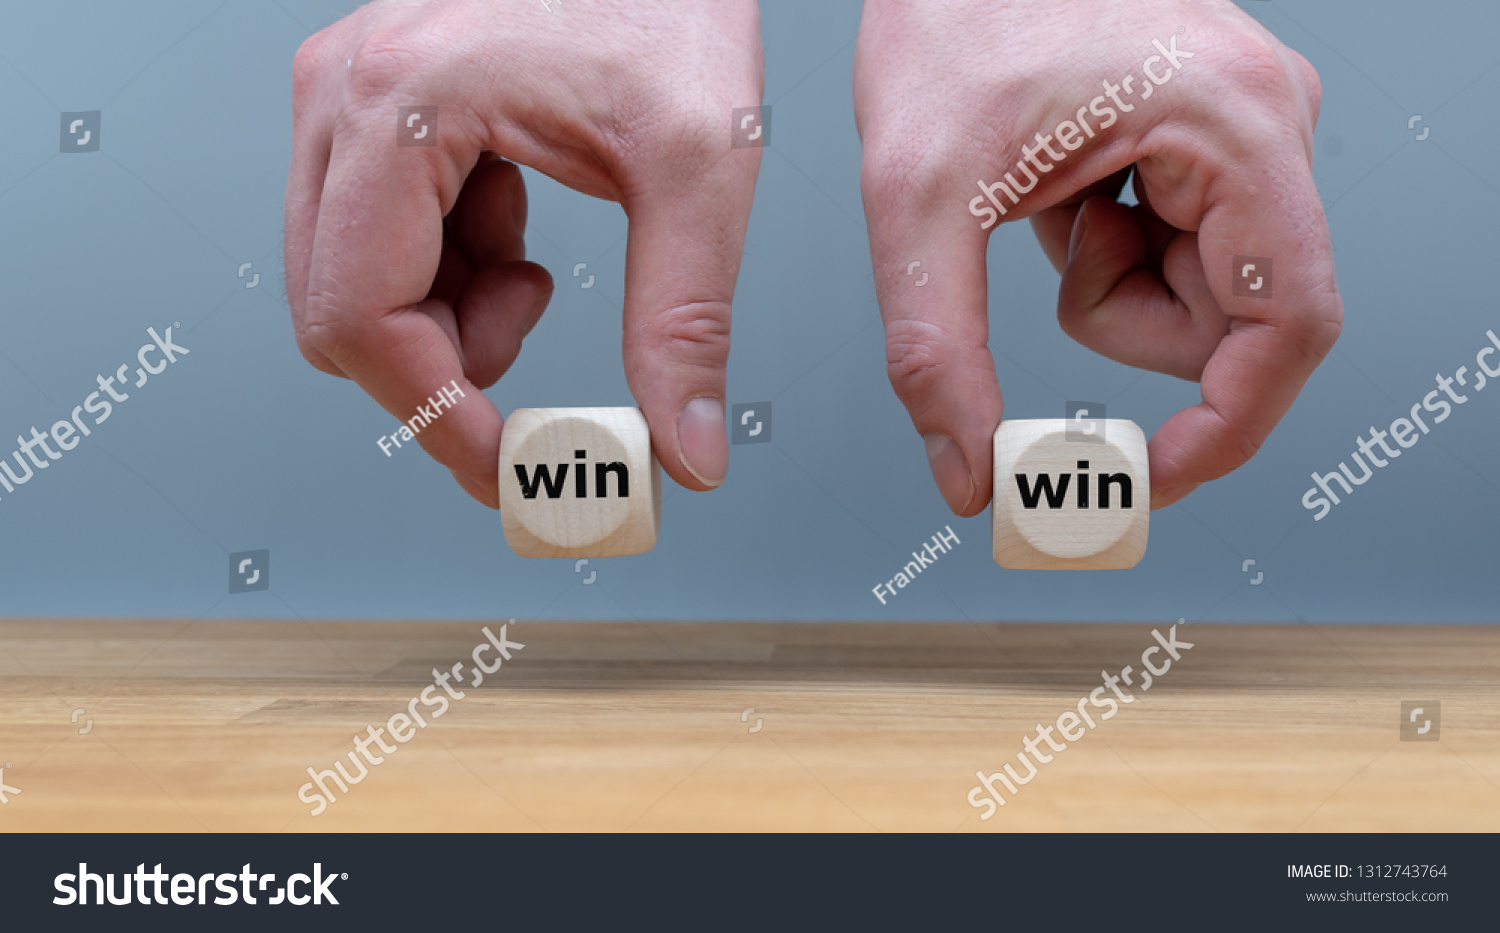 Symbol for a win win situation. Hands are holding two dice with the words "win" and "win" in front of a grey background. #1312743764